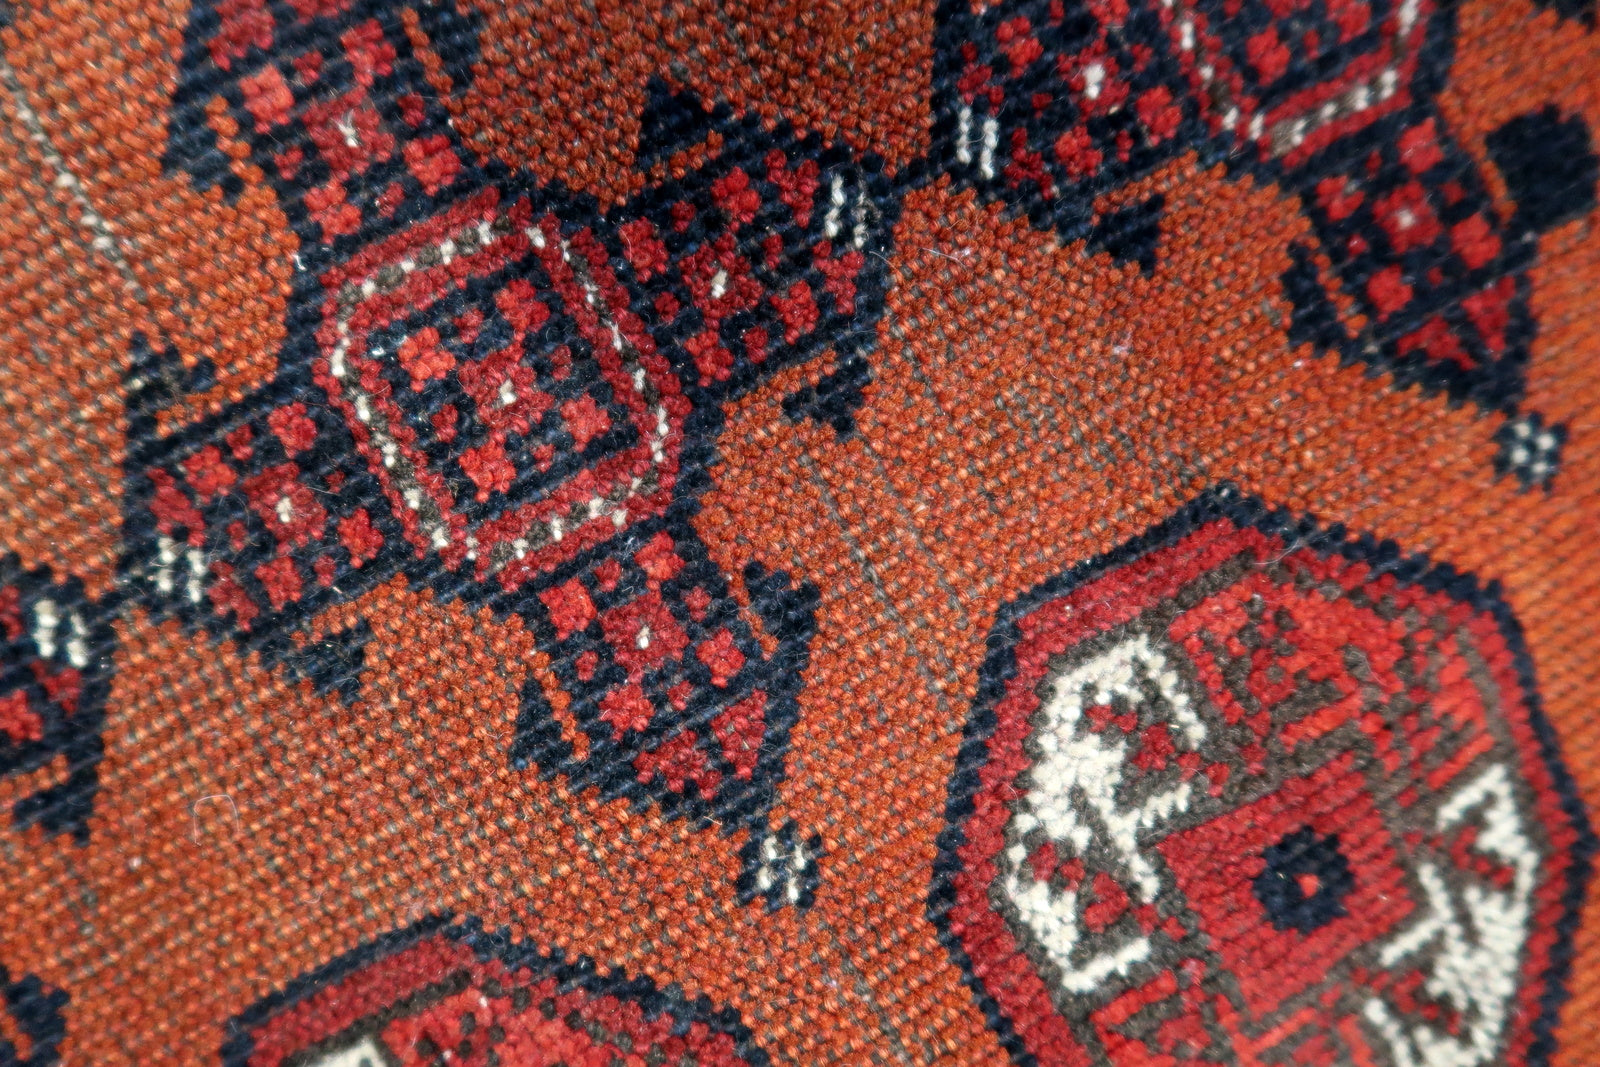 Close-up of vintage charm on Handmade Antique Afghan Baluch Rug - Detailed view emphasizing the rug's vintage charm and historical significance.